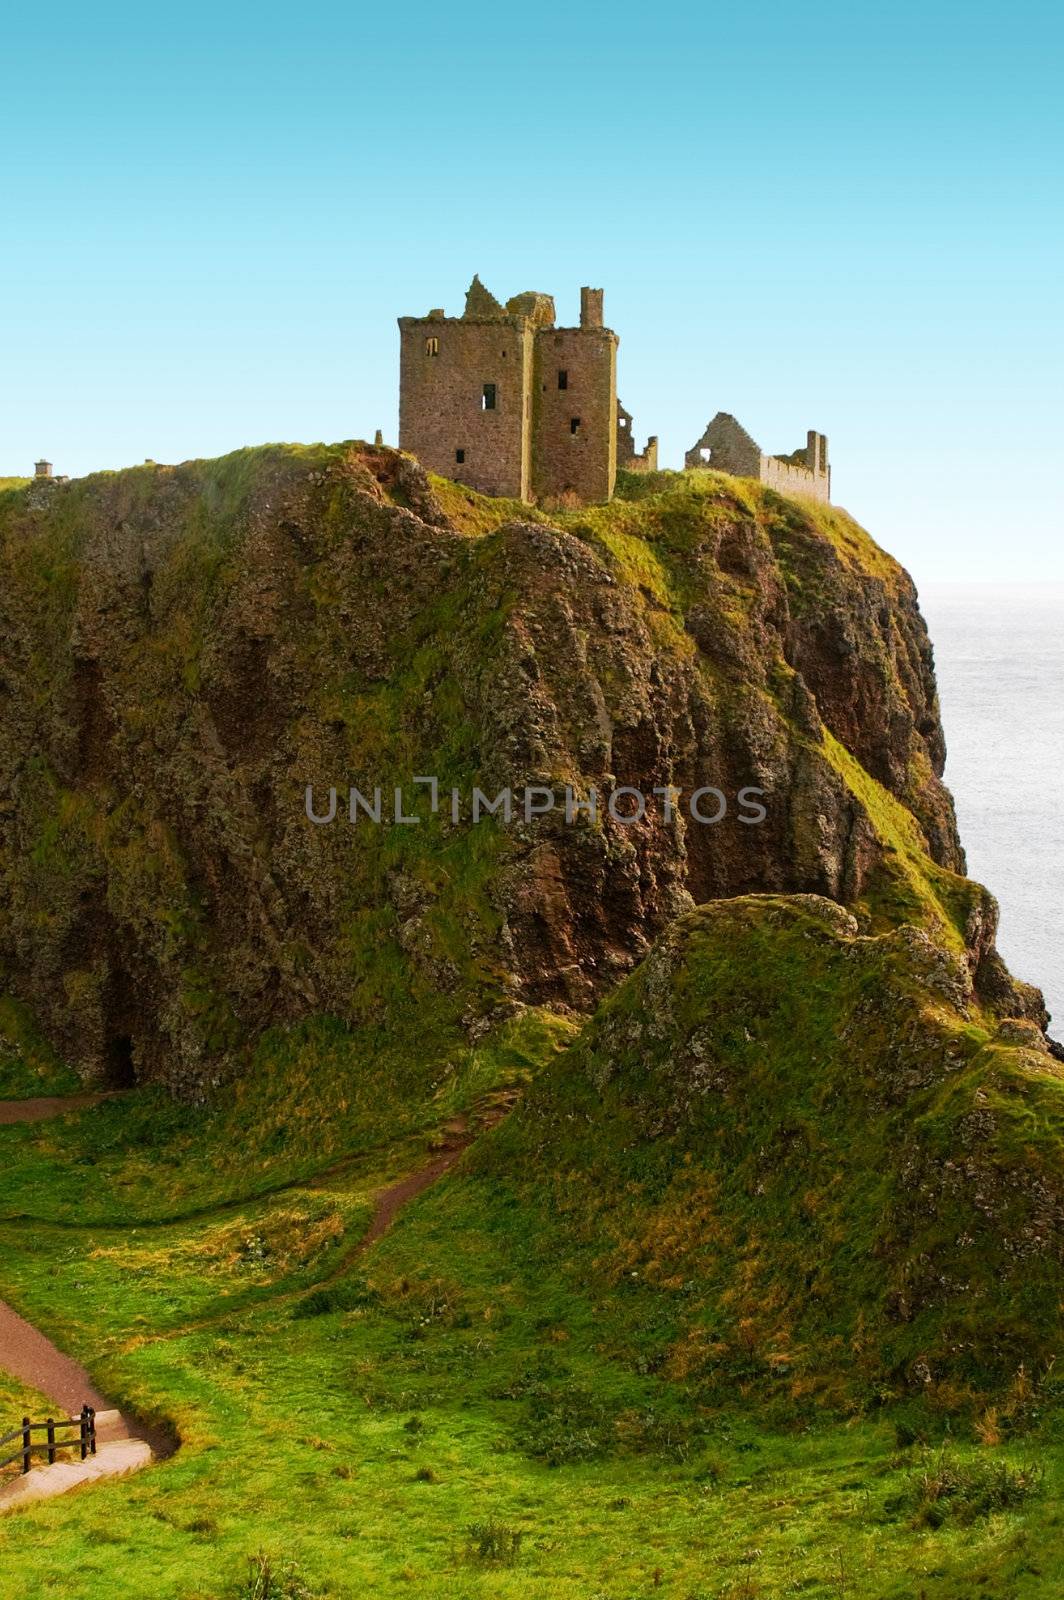 dunnottar castle on a cliff vovered with grass